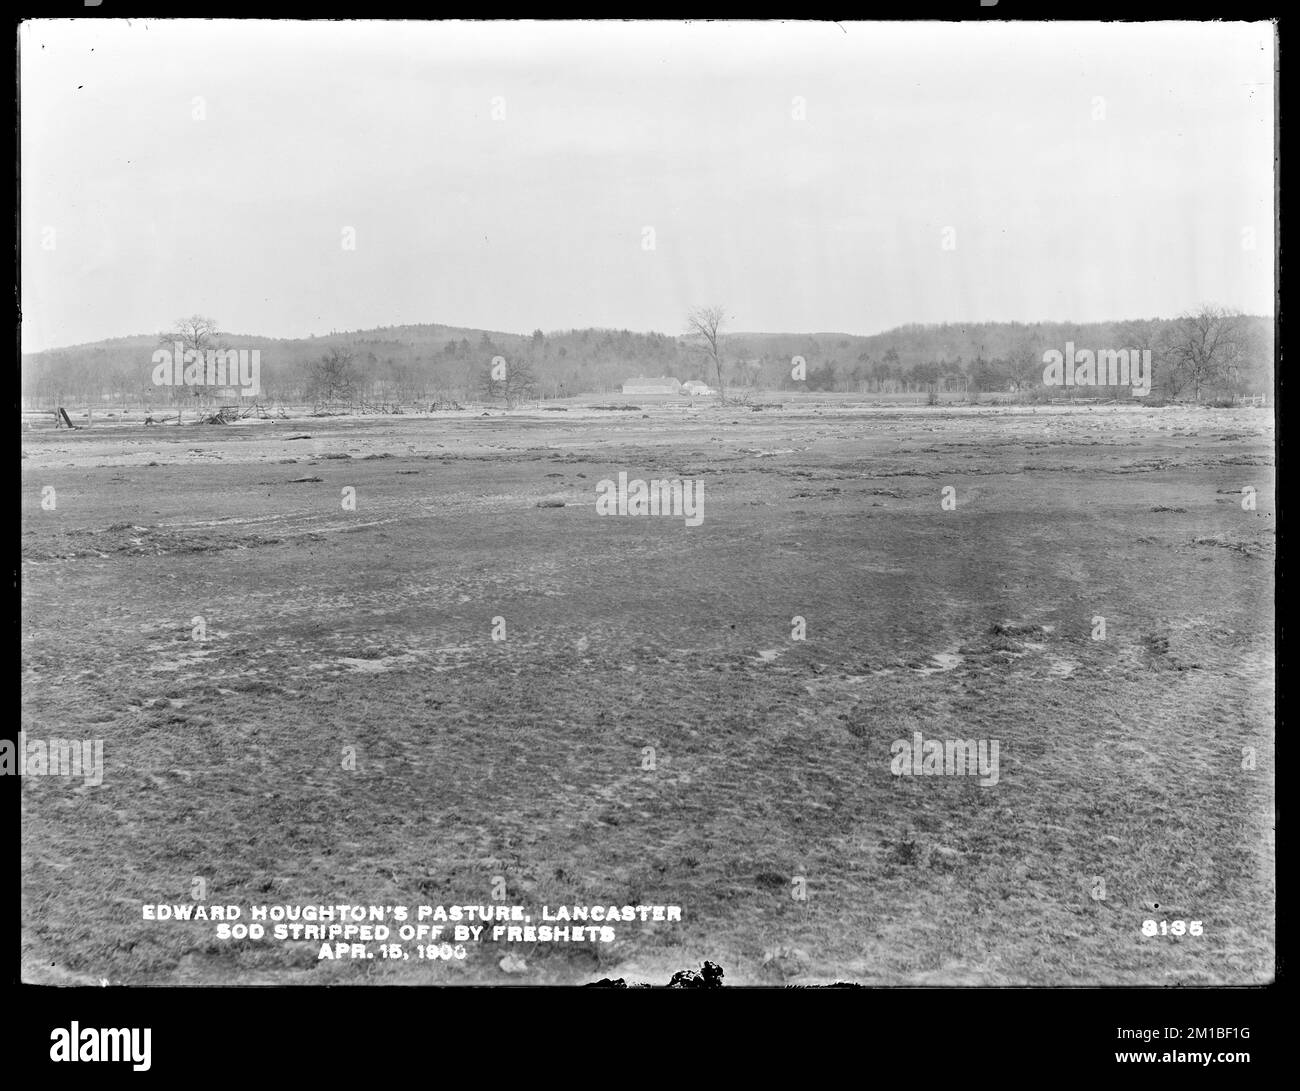 Wachusett Reservoir, Edward Houghton's pasture, sod stripped off by freshets, Lancaster, Mass., Apr. 15, 1900 , waterworks, reservoirs water distribution structures, watershed sanitary improvement Stock Photo